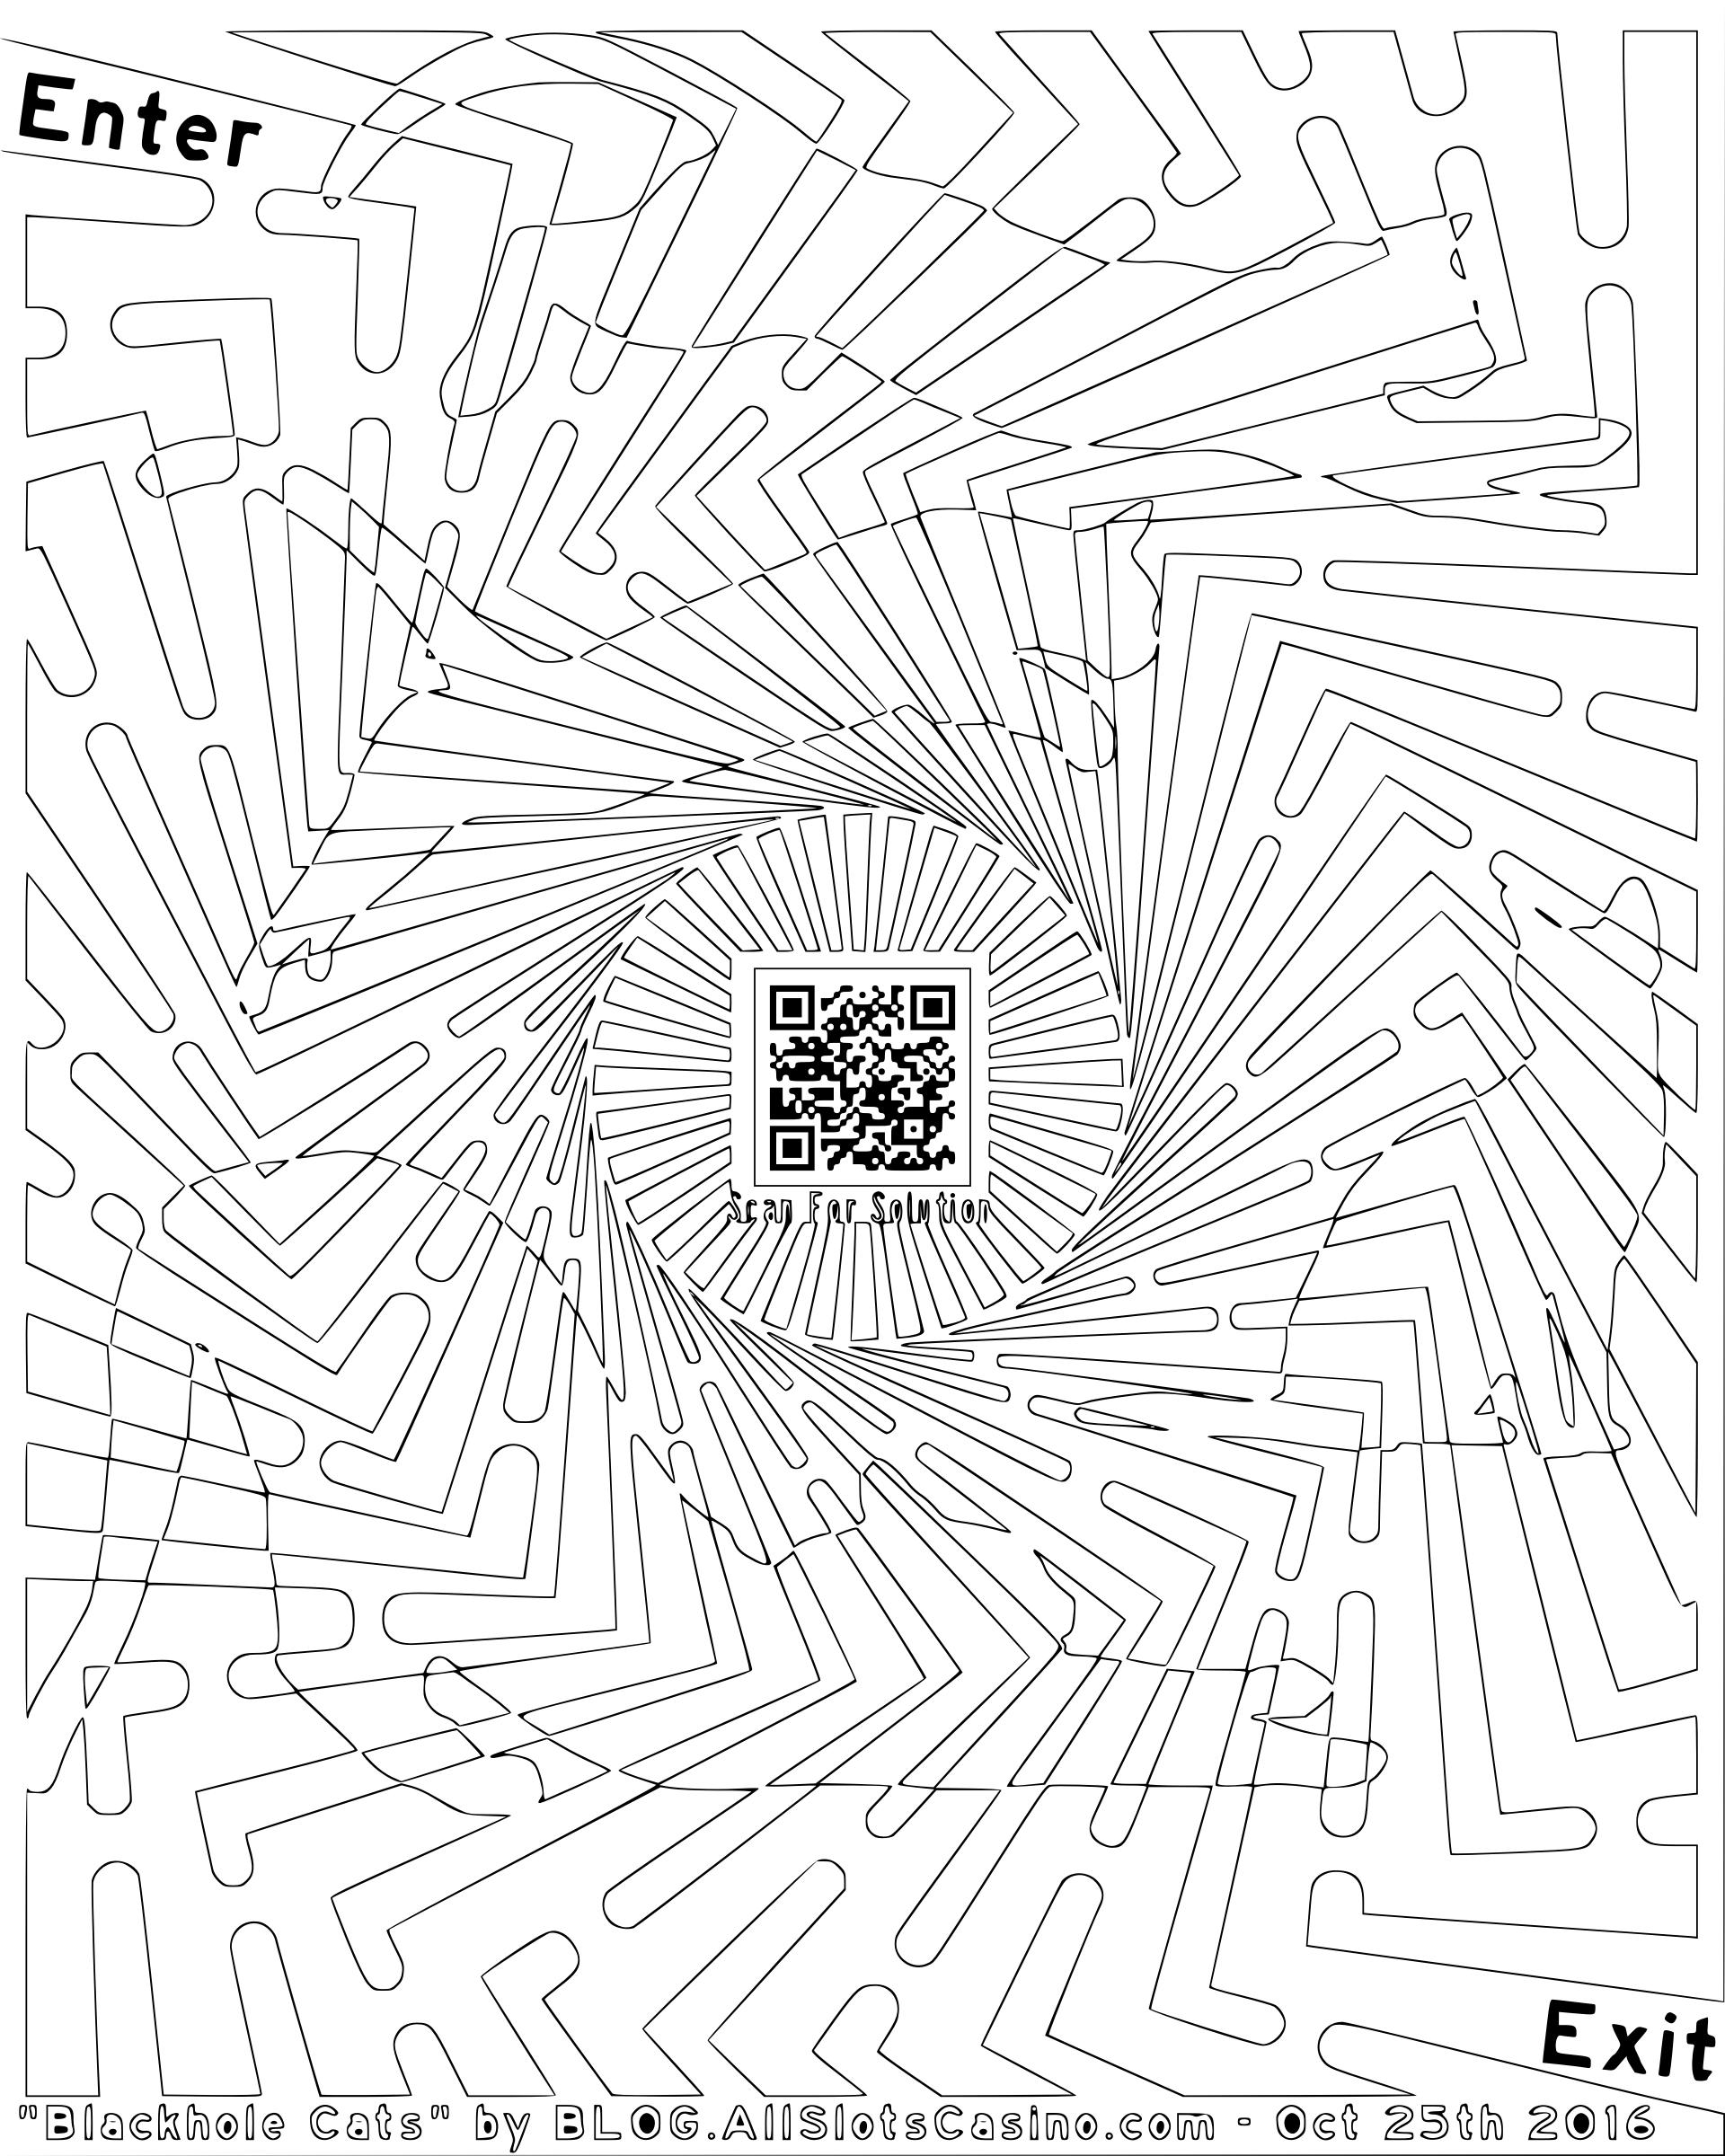 Blackhole Cats Maze Coloring For Adults png